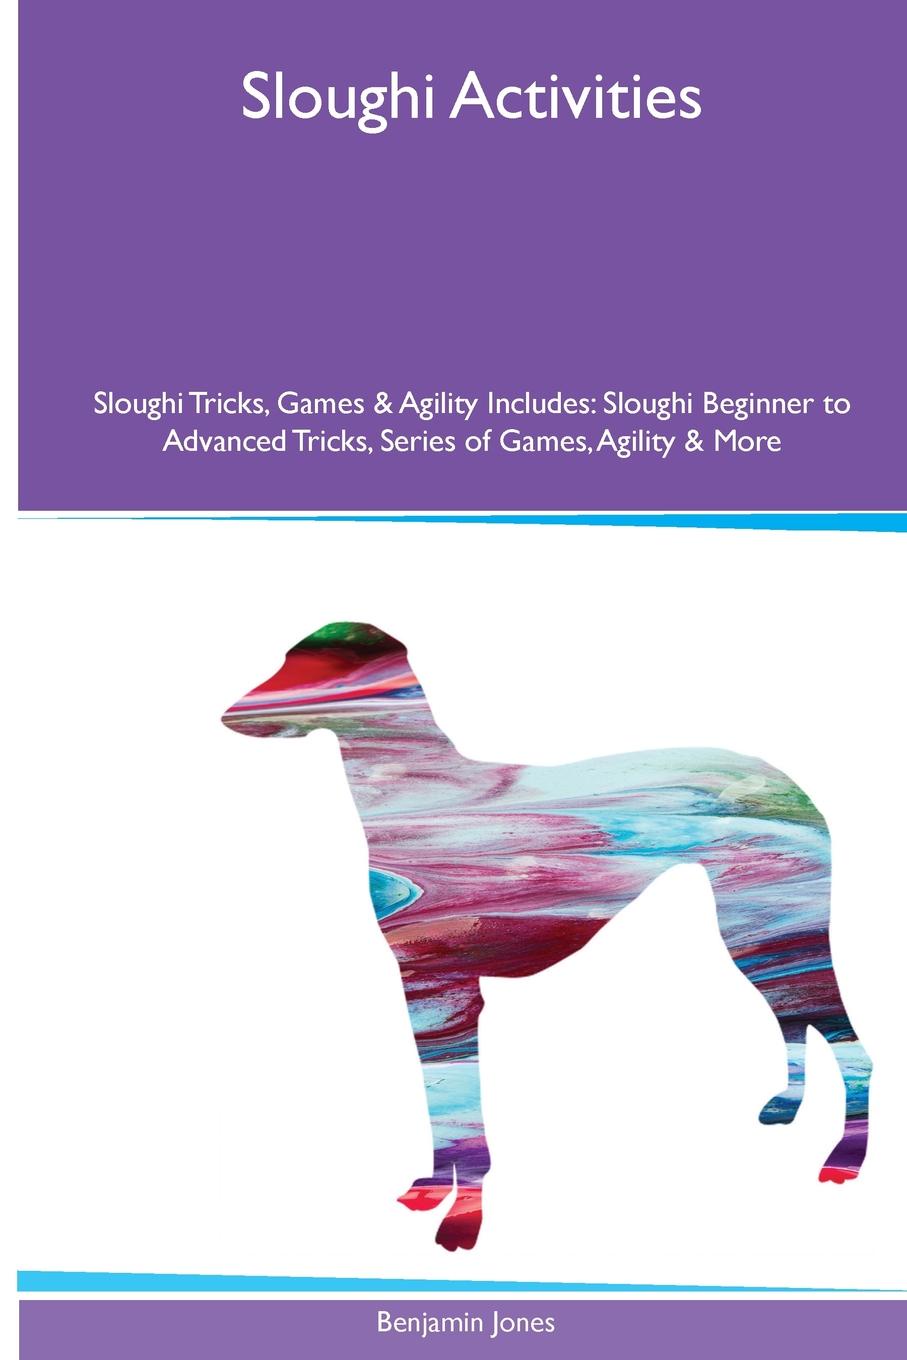 Sloughi  Activities Sloughi Tricks, Games & Agility. Includes. Sloughi Beginner to Advanced Tricks, Series of Games, Agility and More